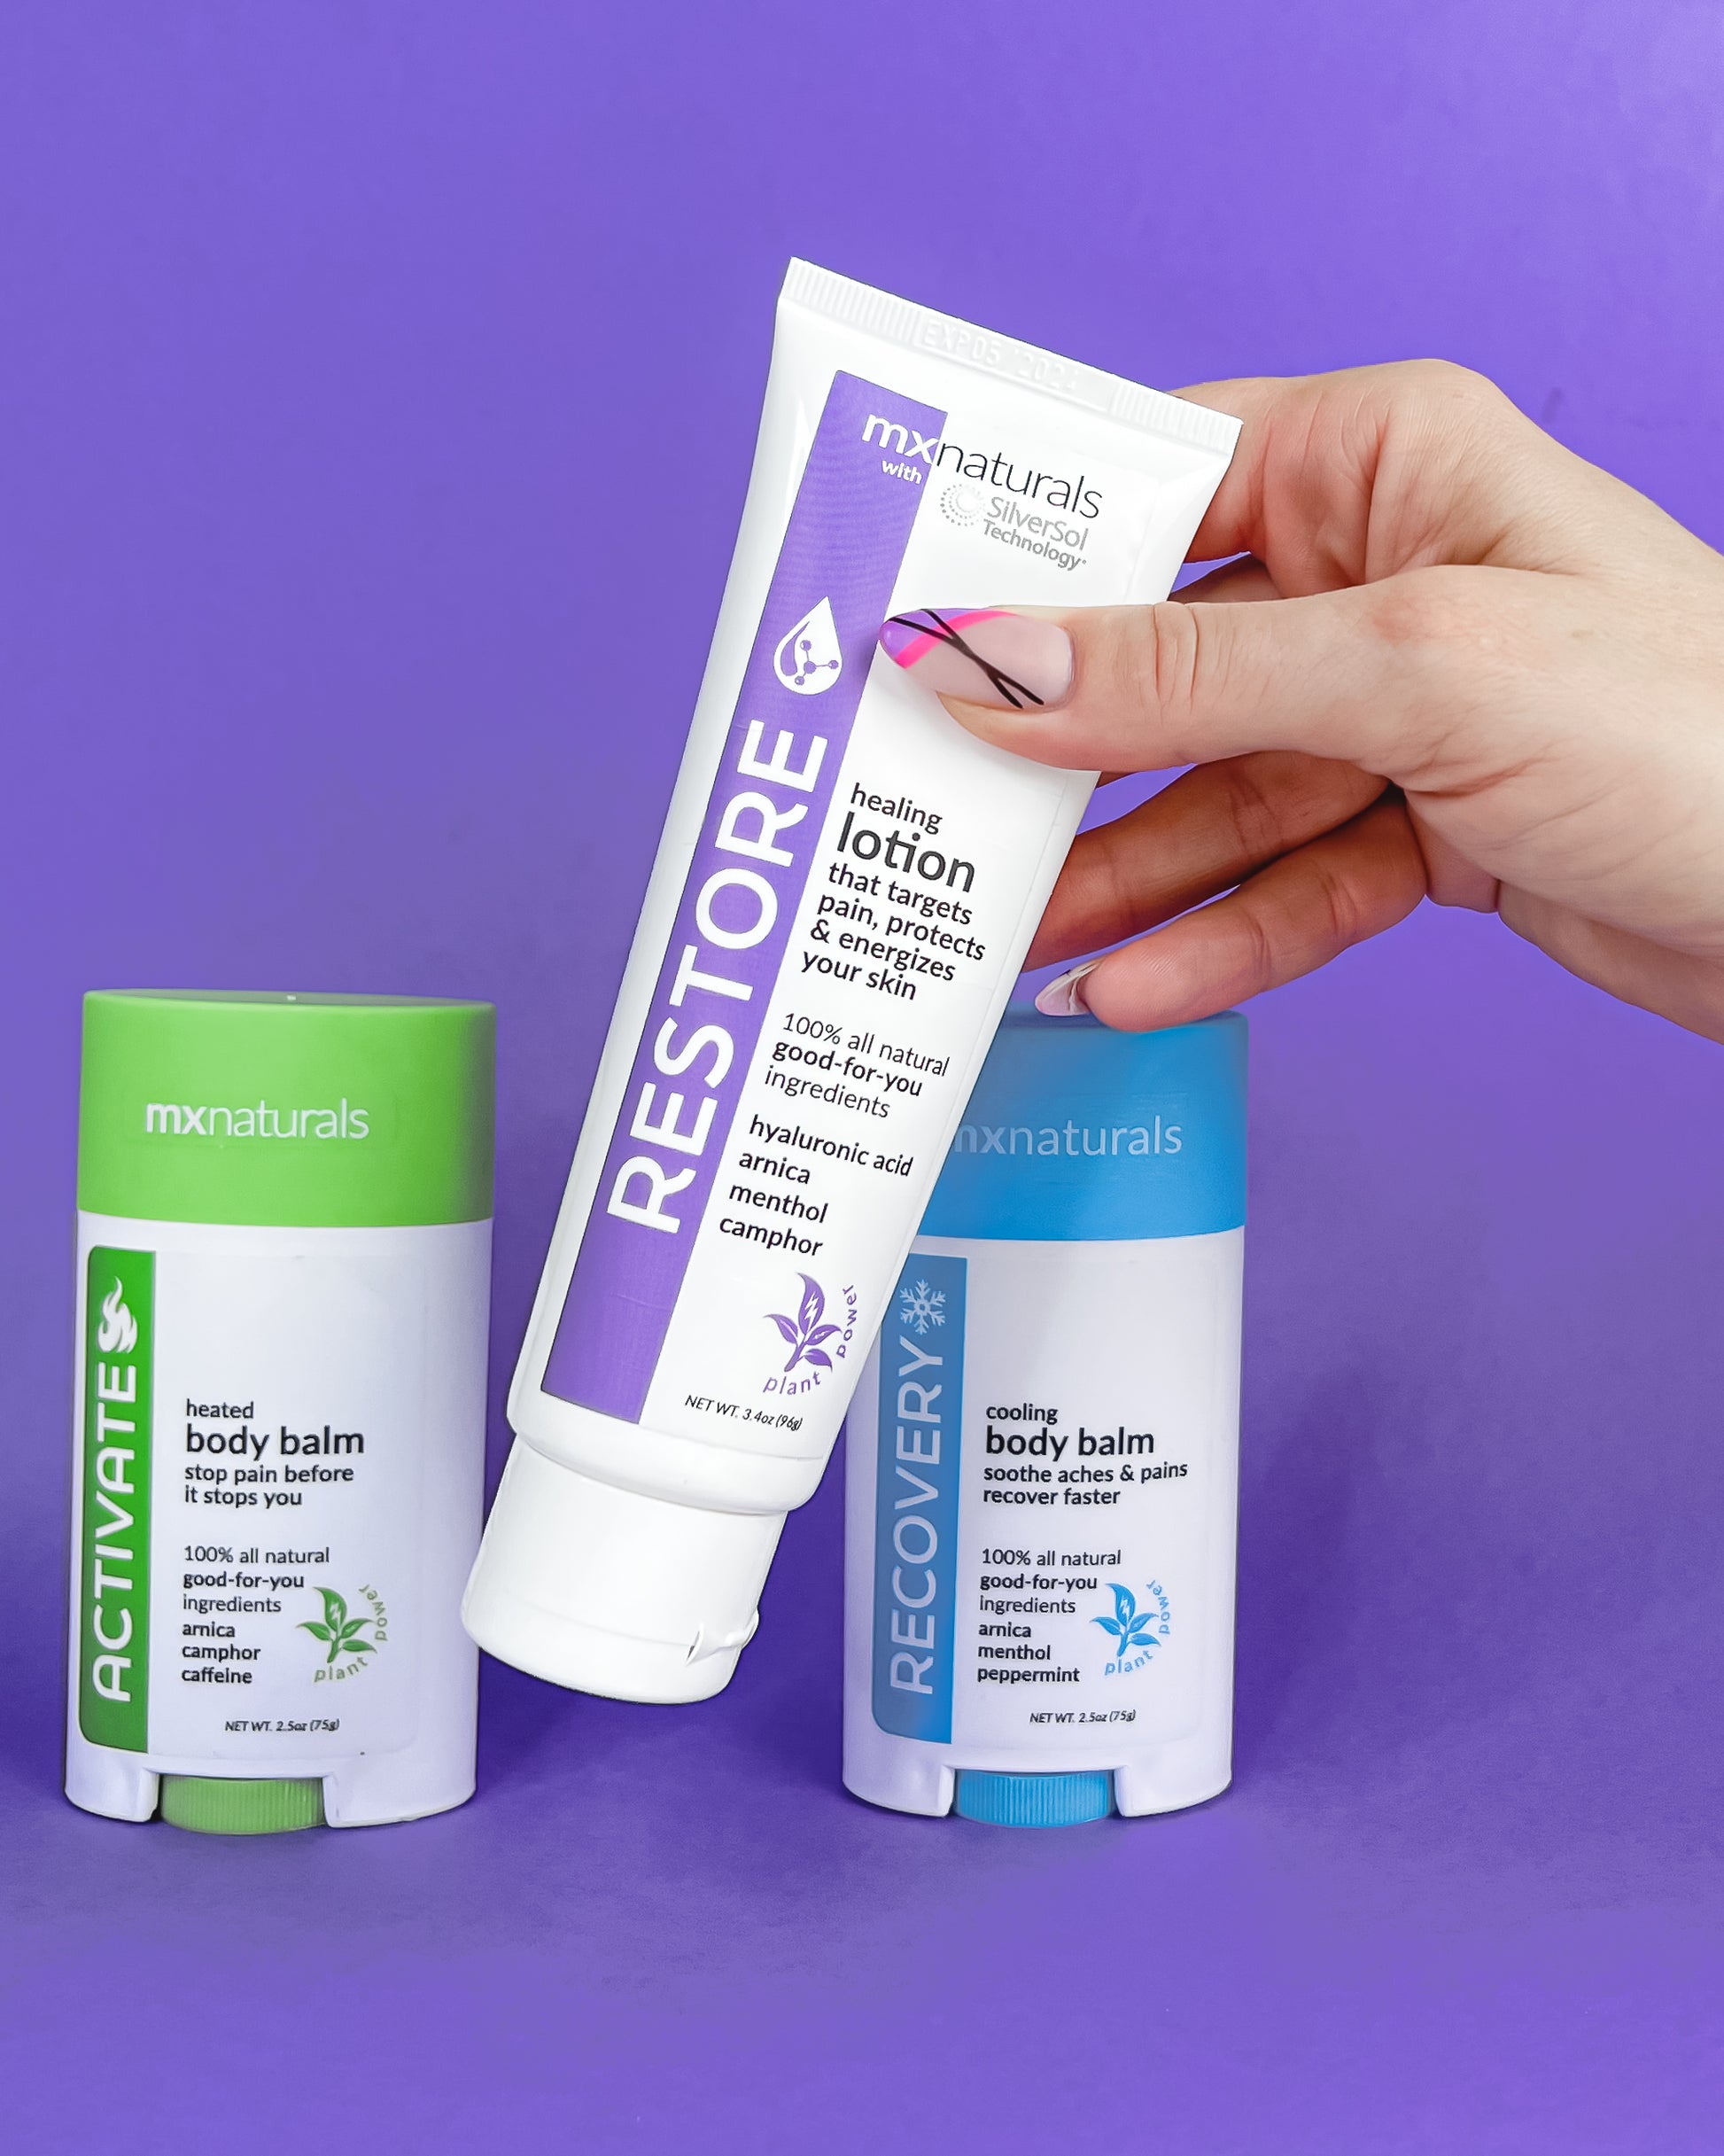 well manicured caucasian female hand picking up a white and purple "restore healing lotion that targets pain, protects and energizes your skin". two additional products, "activate heated pain relief body balm" and "recovery cooling pain relief body balm" rest on the lower plane against a purple background.